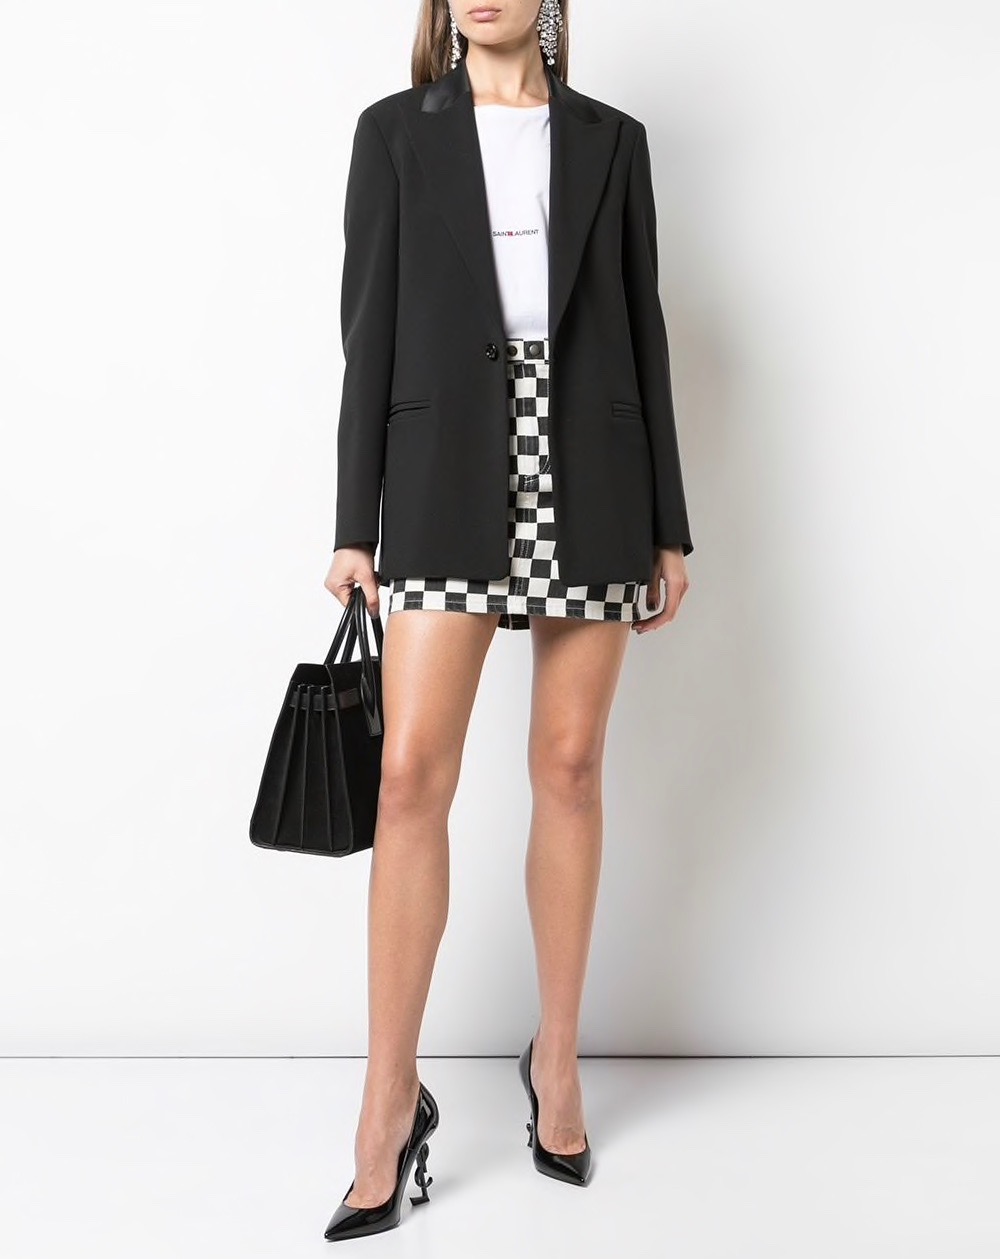 Checkerboard Clothing and Shoes for Summer and Fall - theFashionSpot